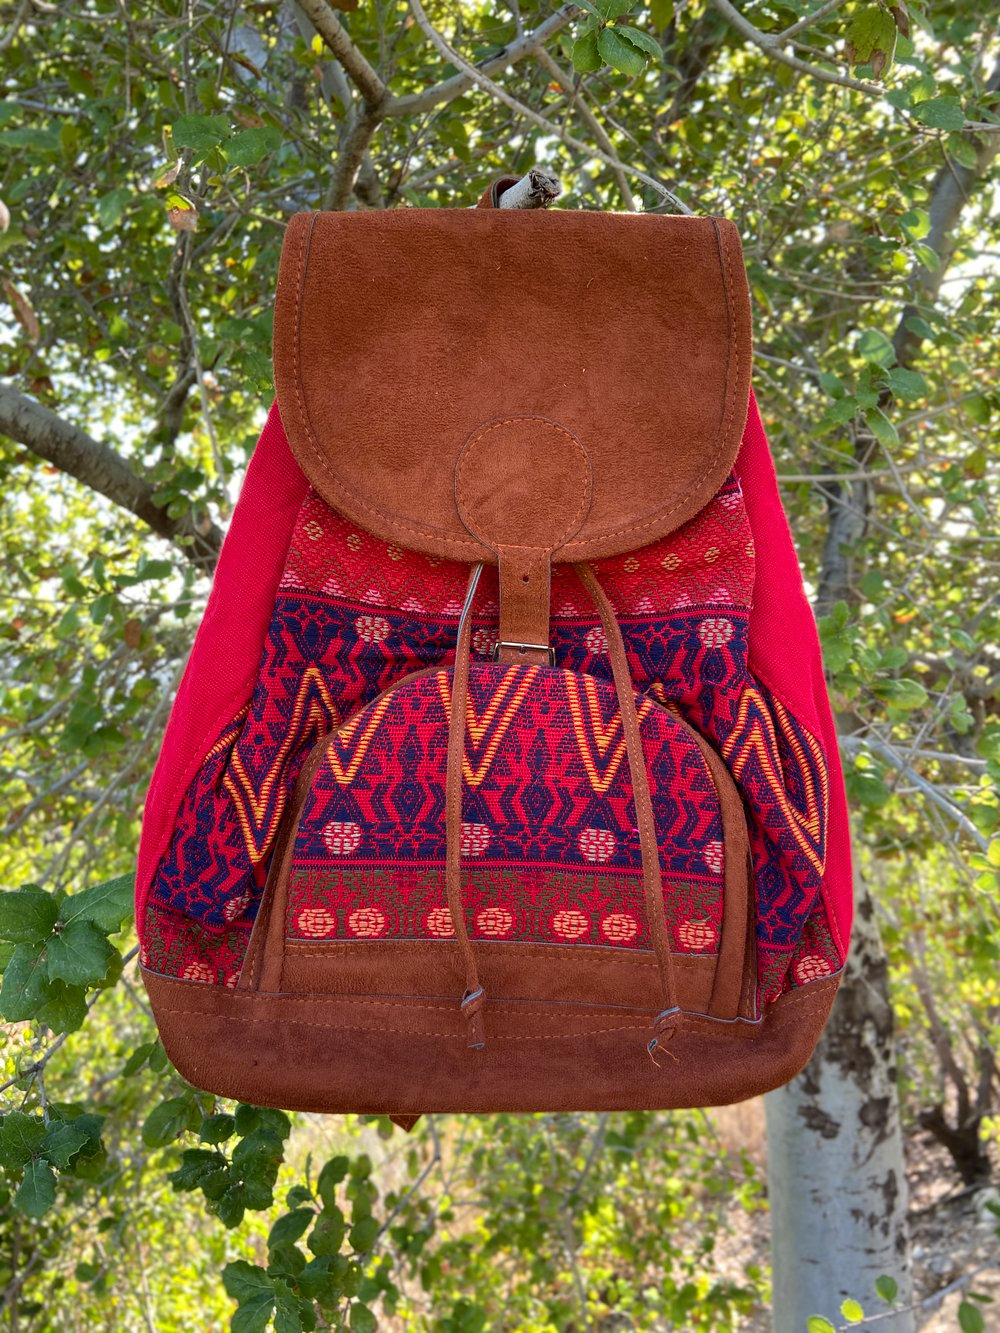 Large Woven Backpack 